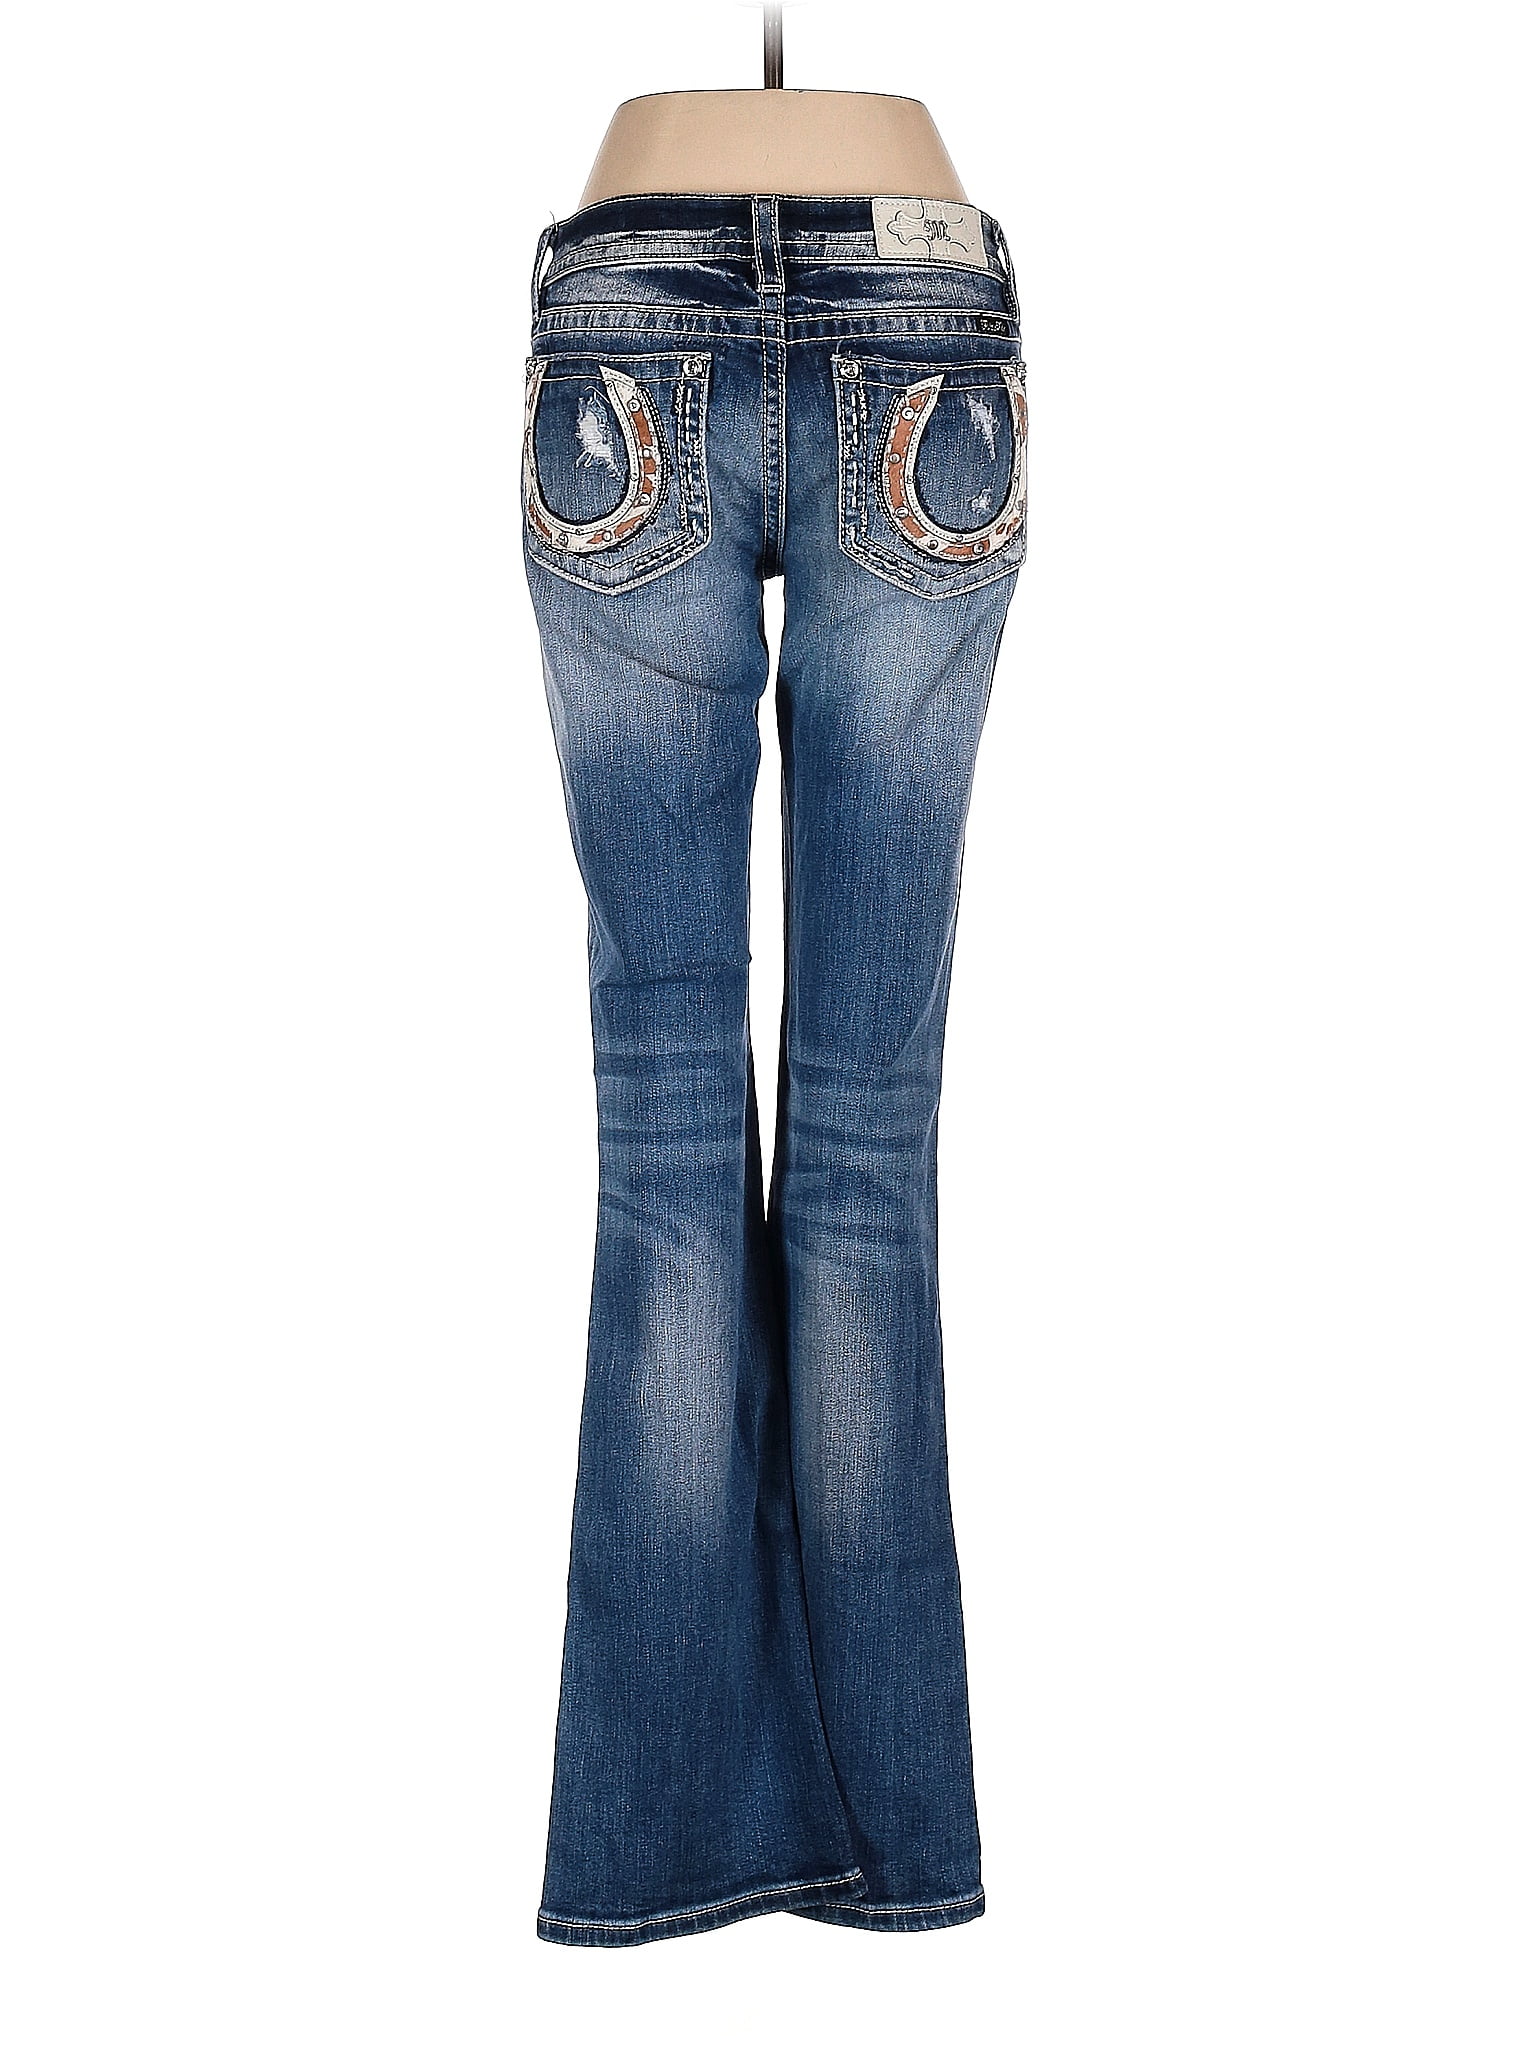 Miss Me Flare and bell bottom jeans for Women